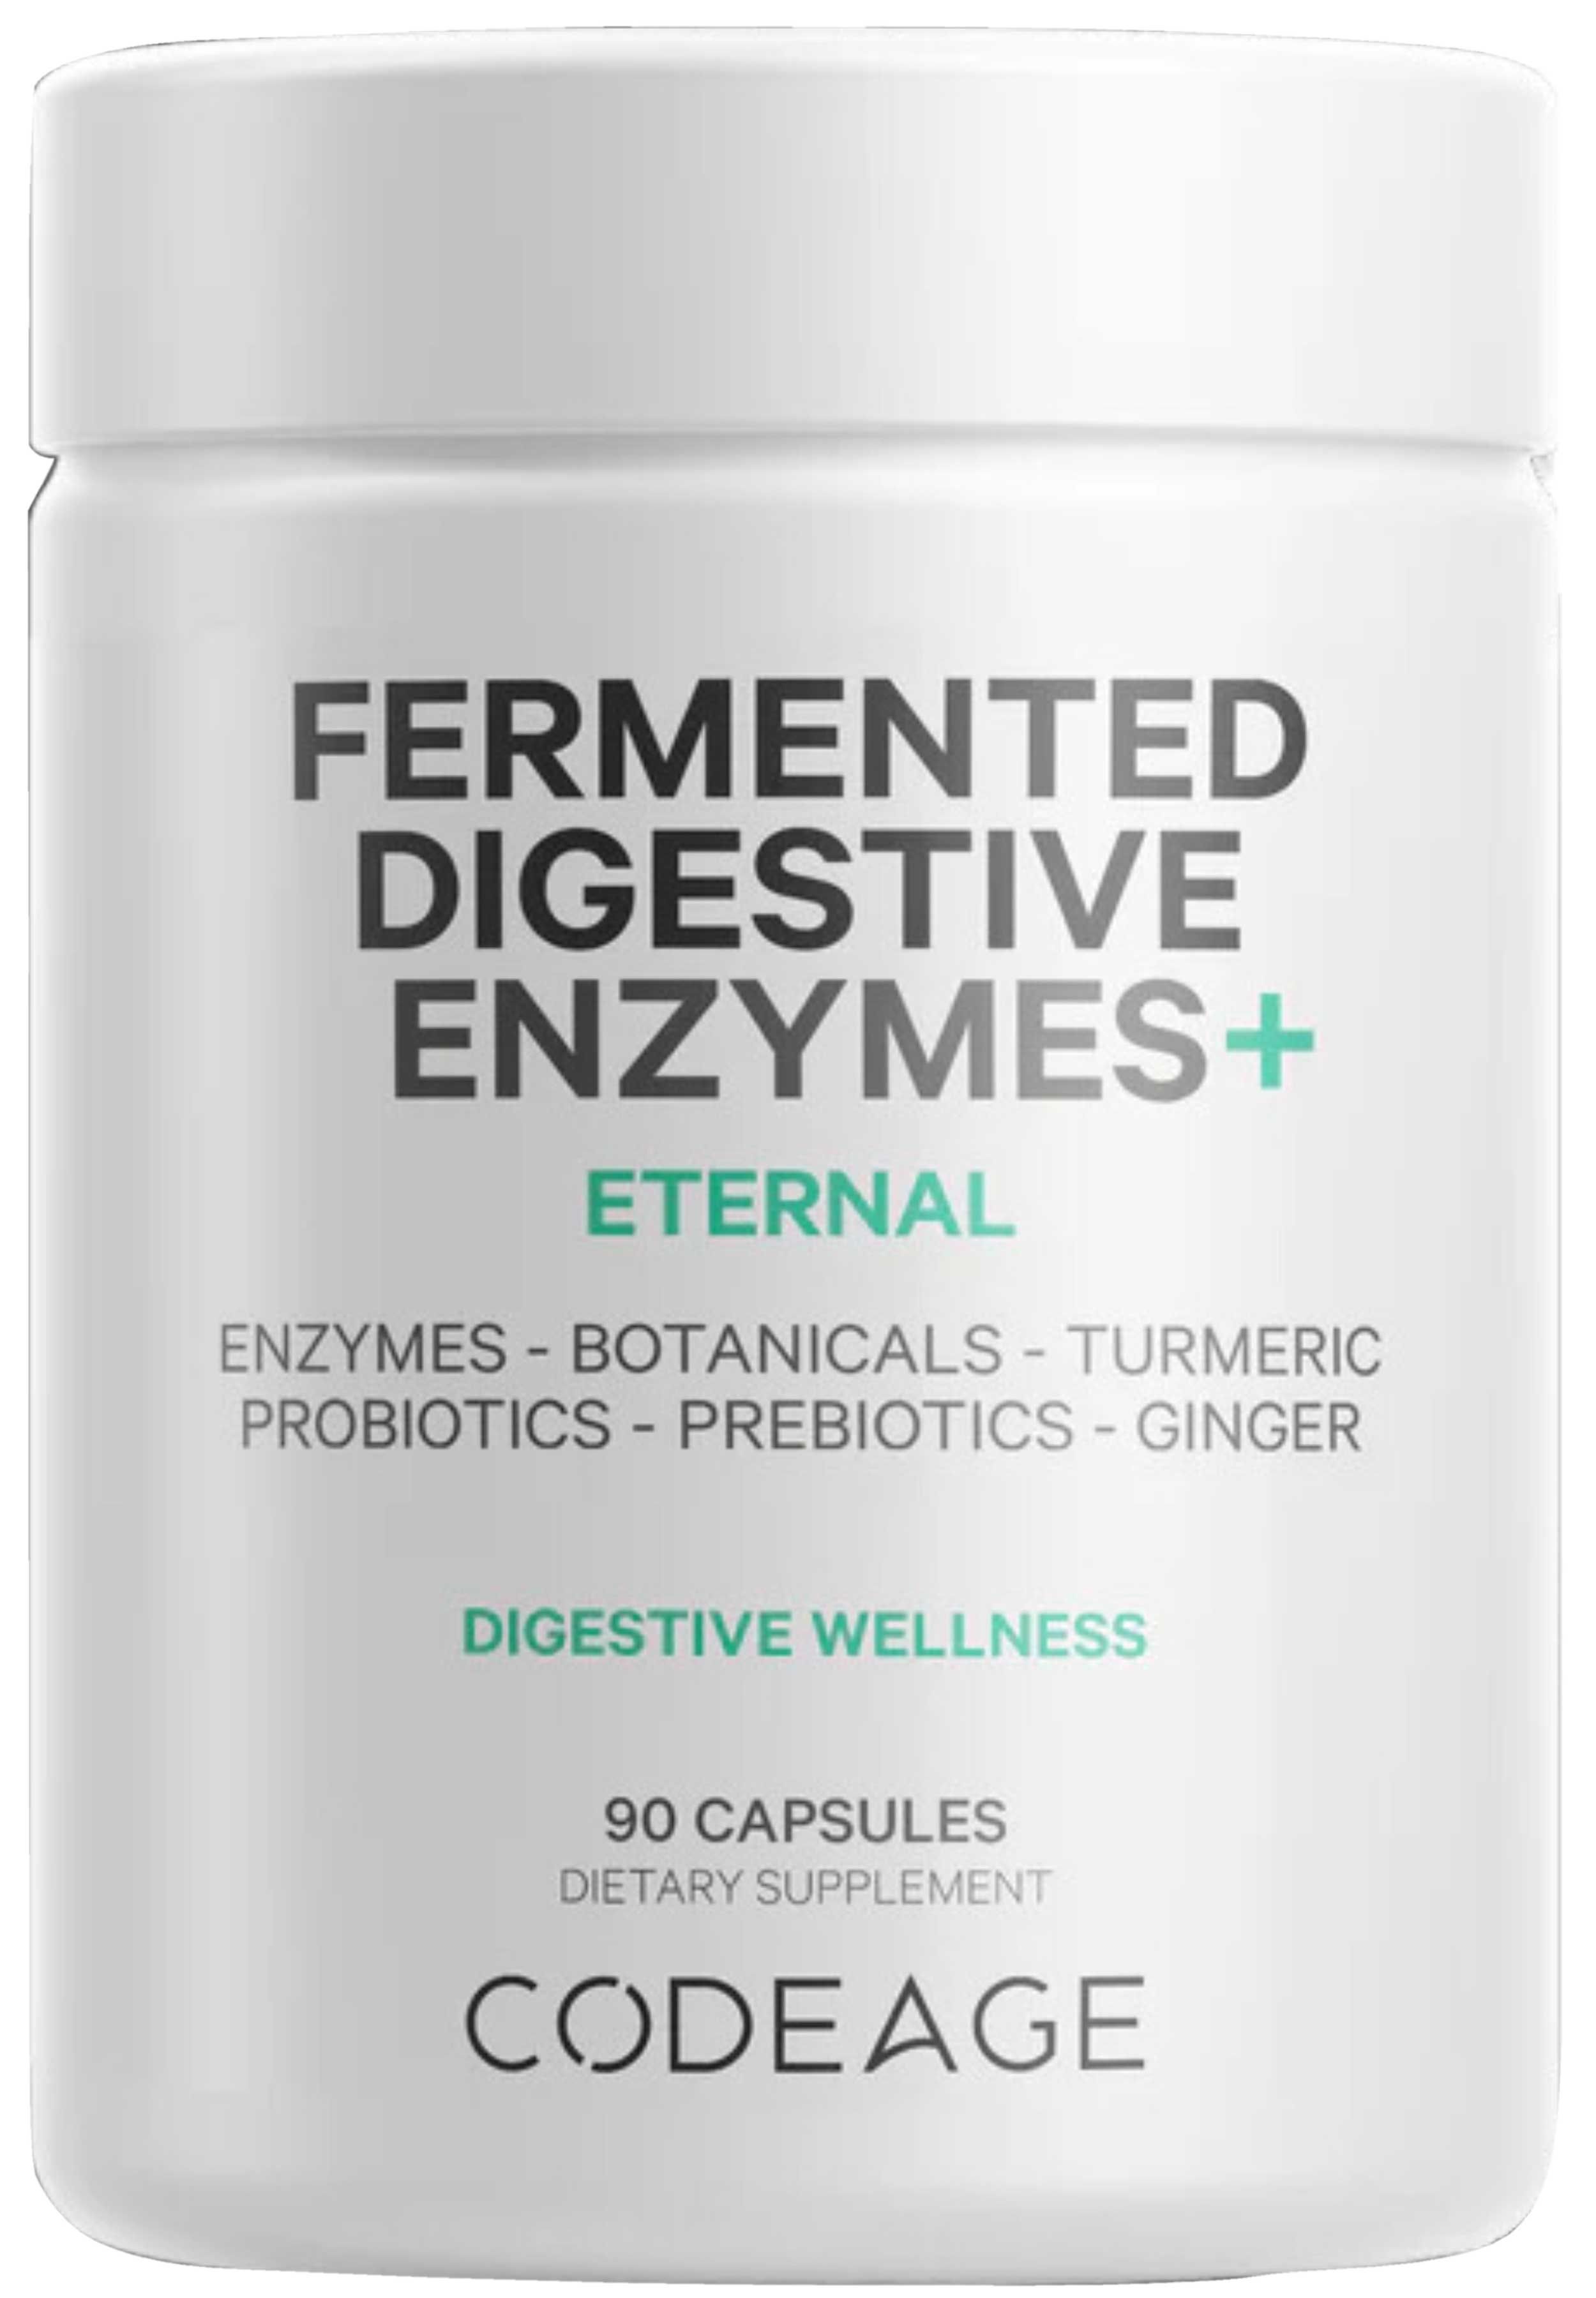 Codeage Fermented Digestive Enzymes+